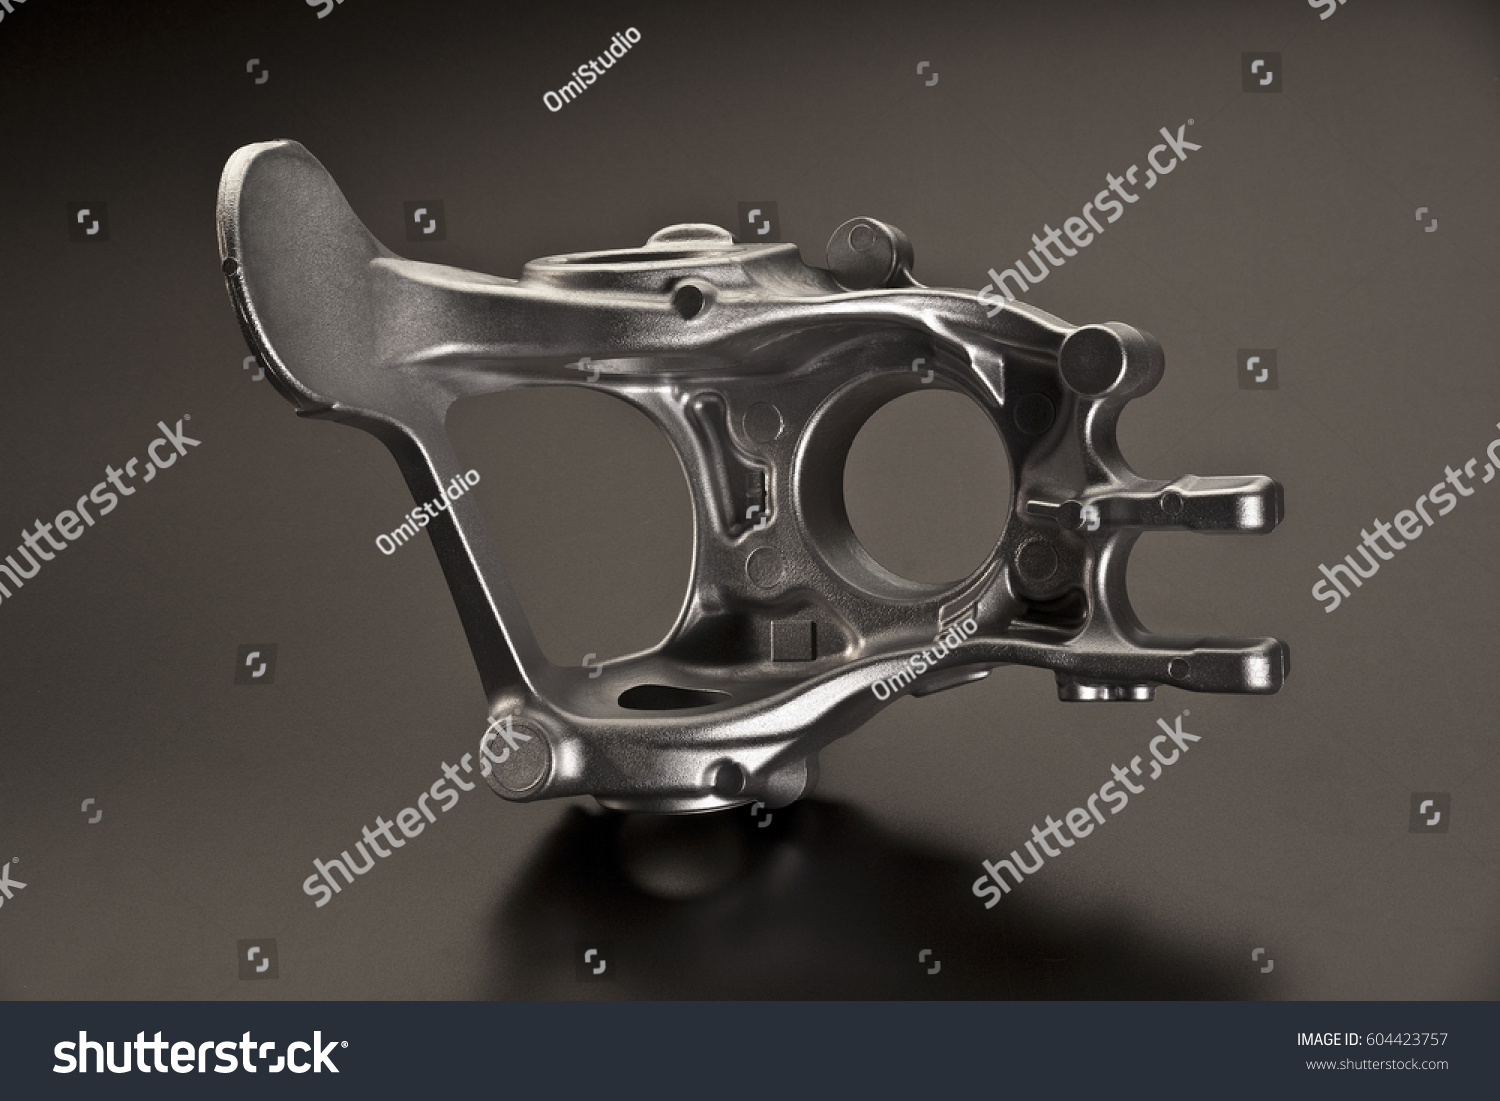 stock-photo-industrial-close-up-of-piece-of-cast-iron-over-dark-background-604423757